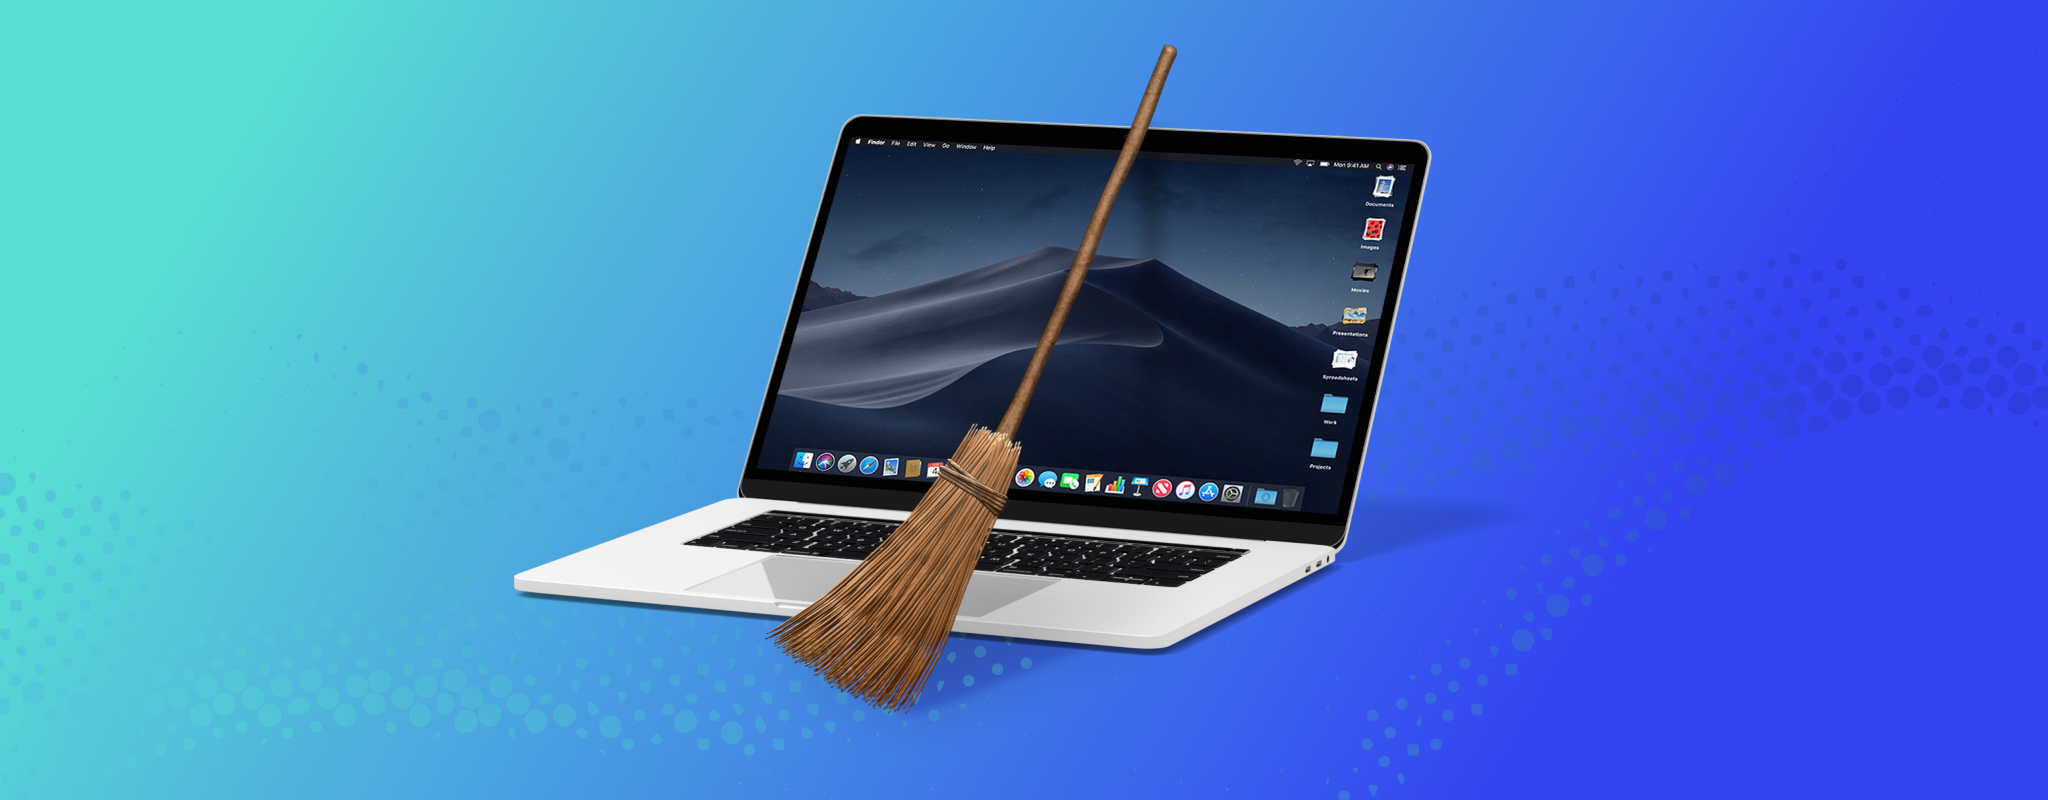 free mac cleaner software open source